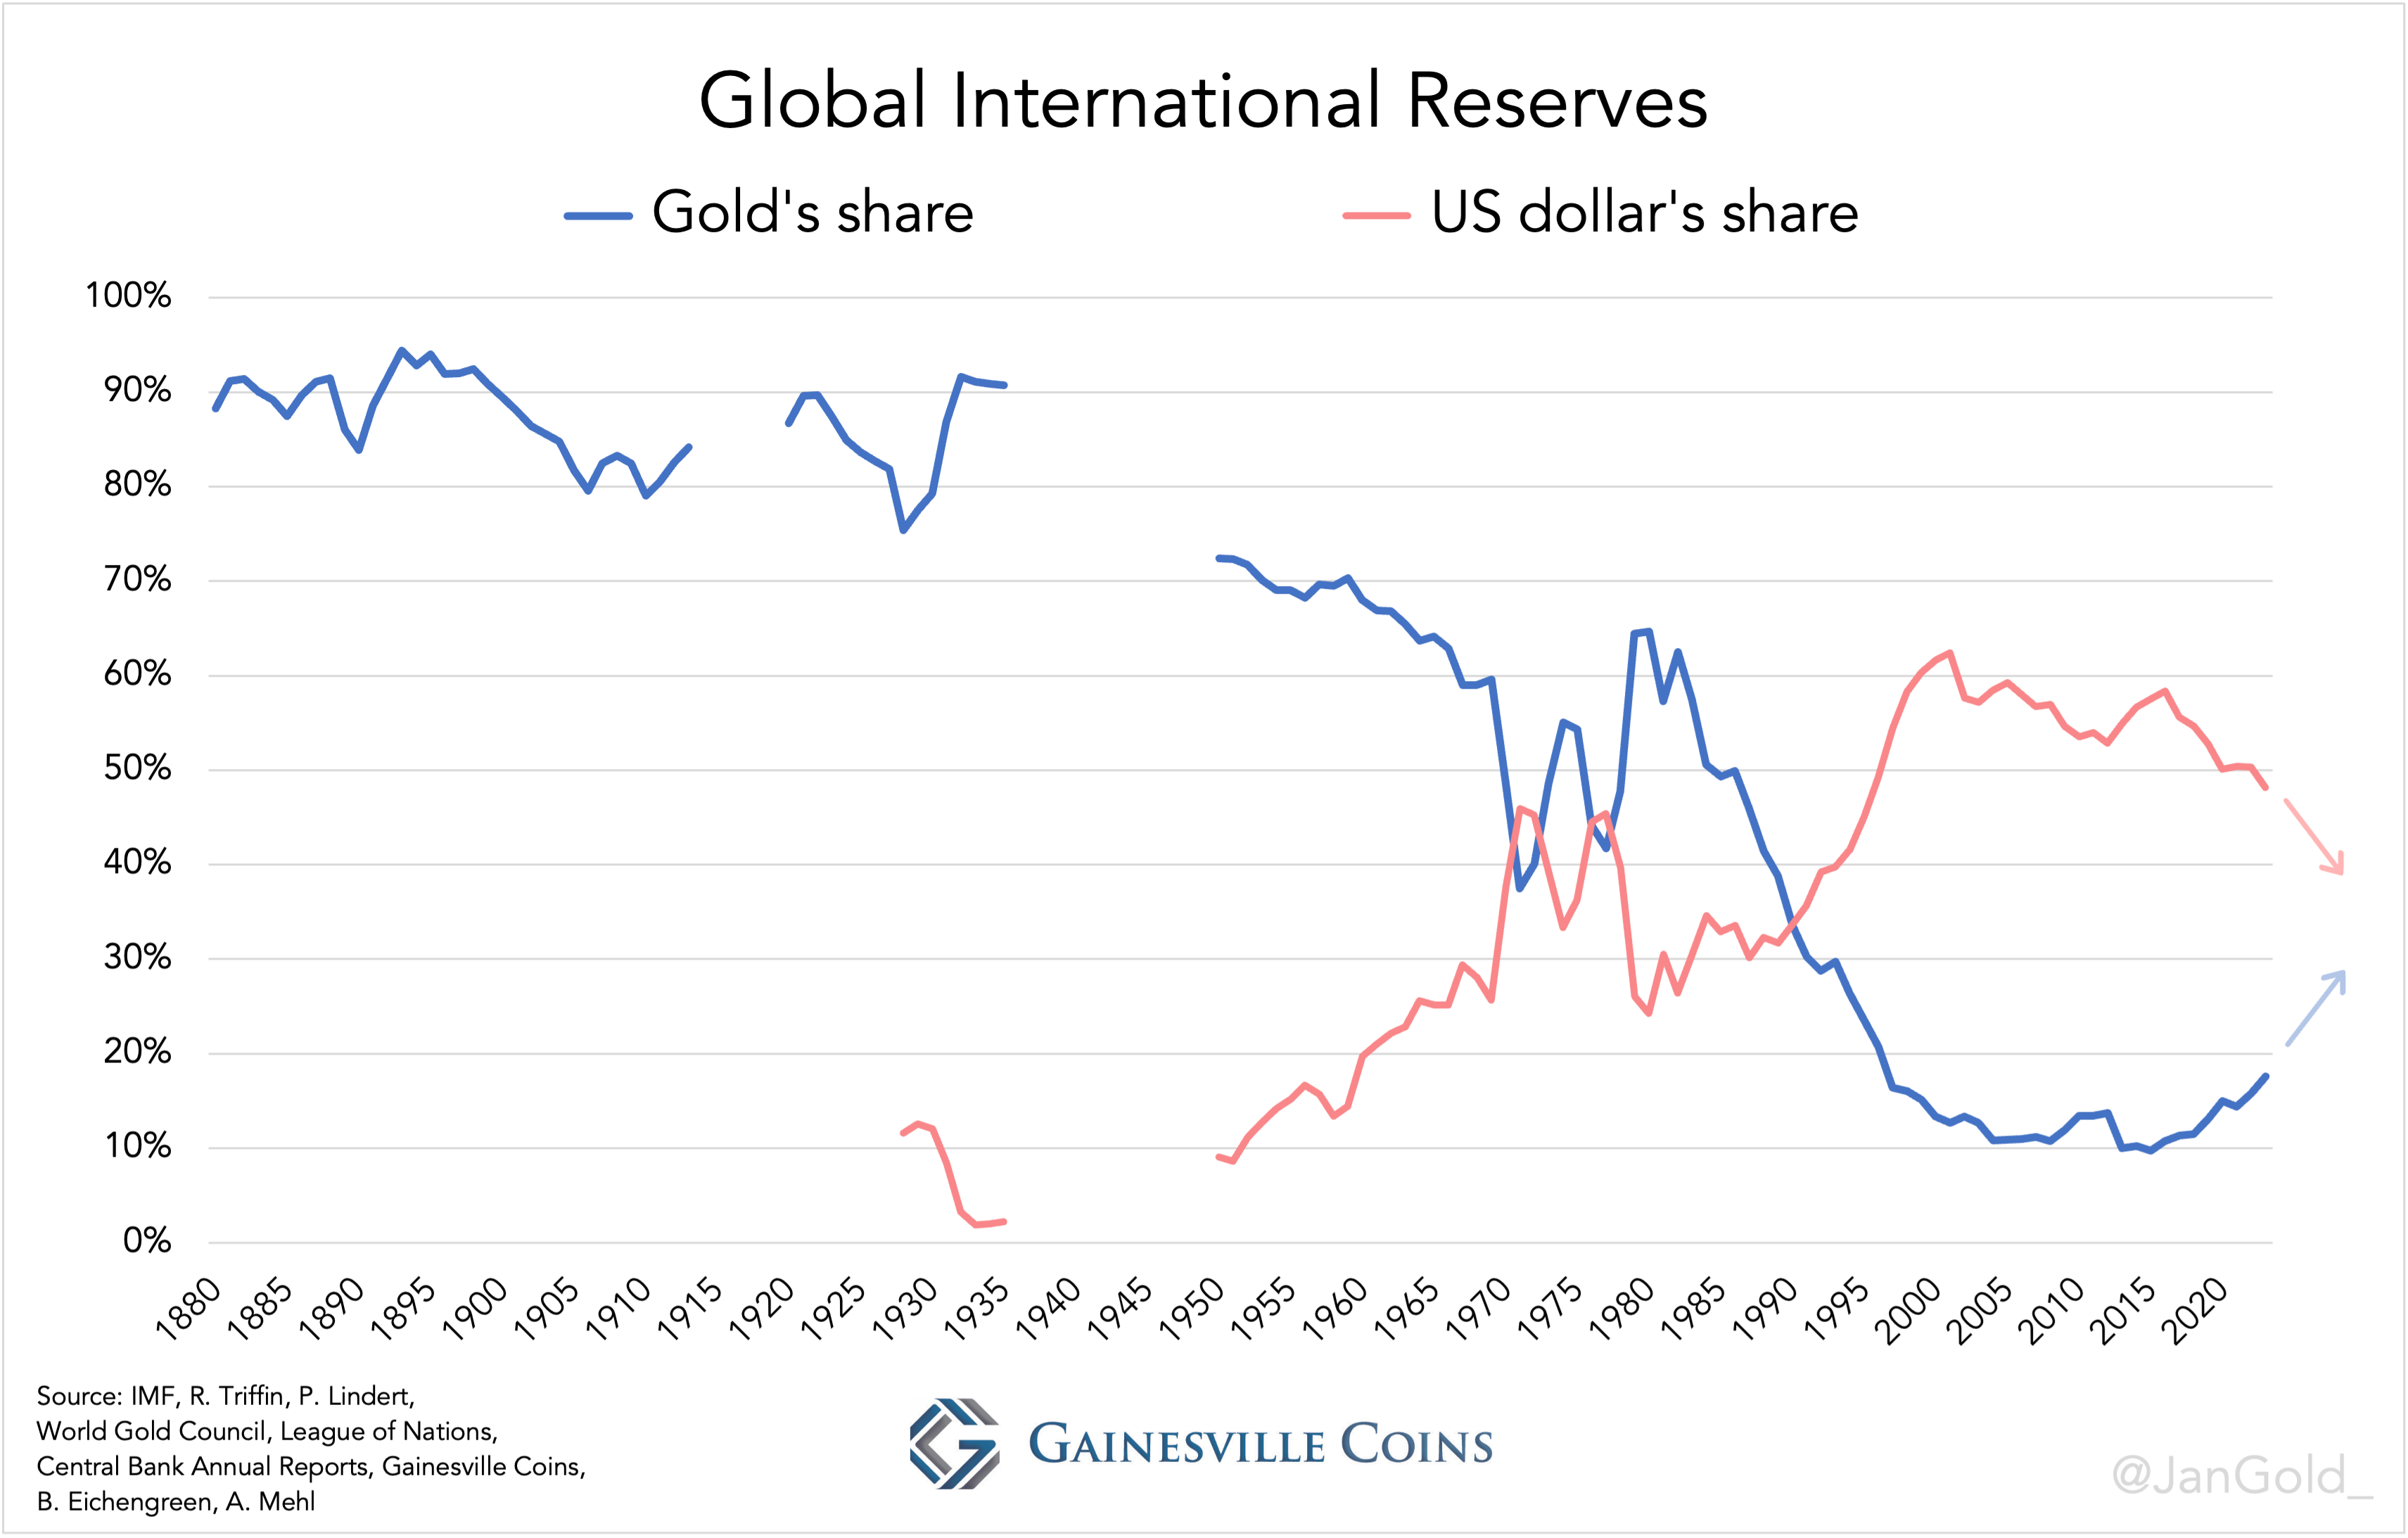 Global International Reserves, gold and the dollar since 1880